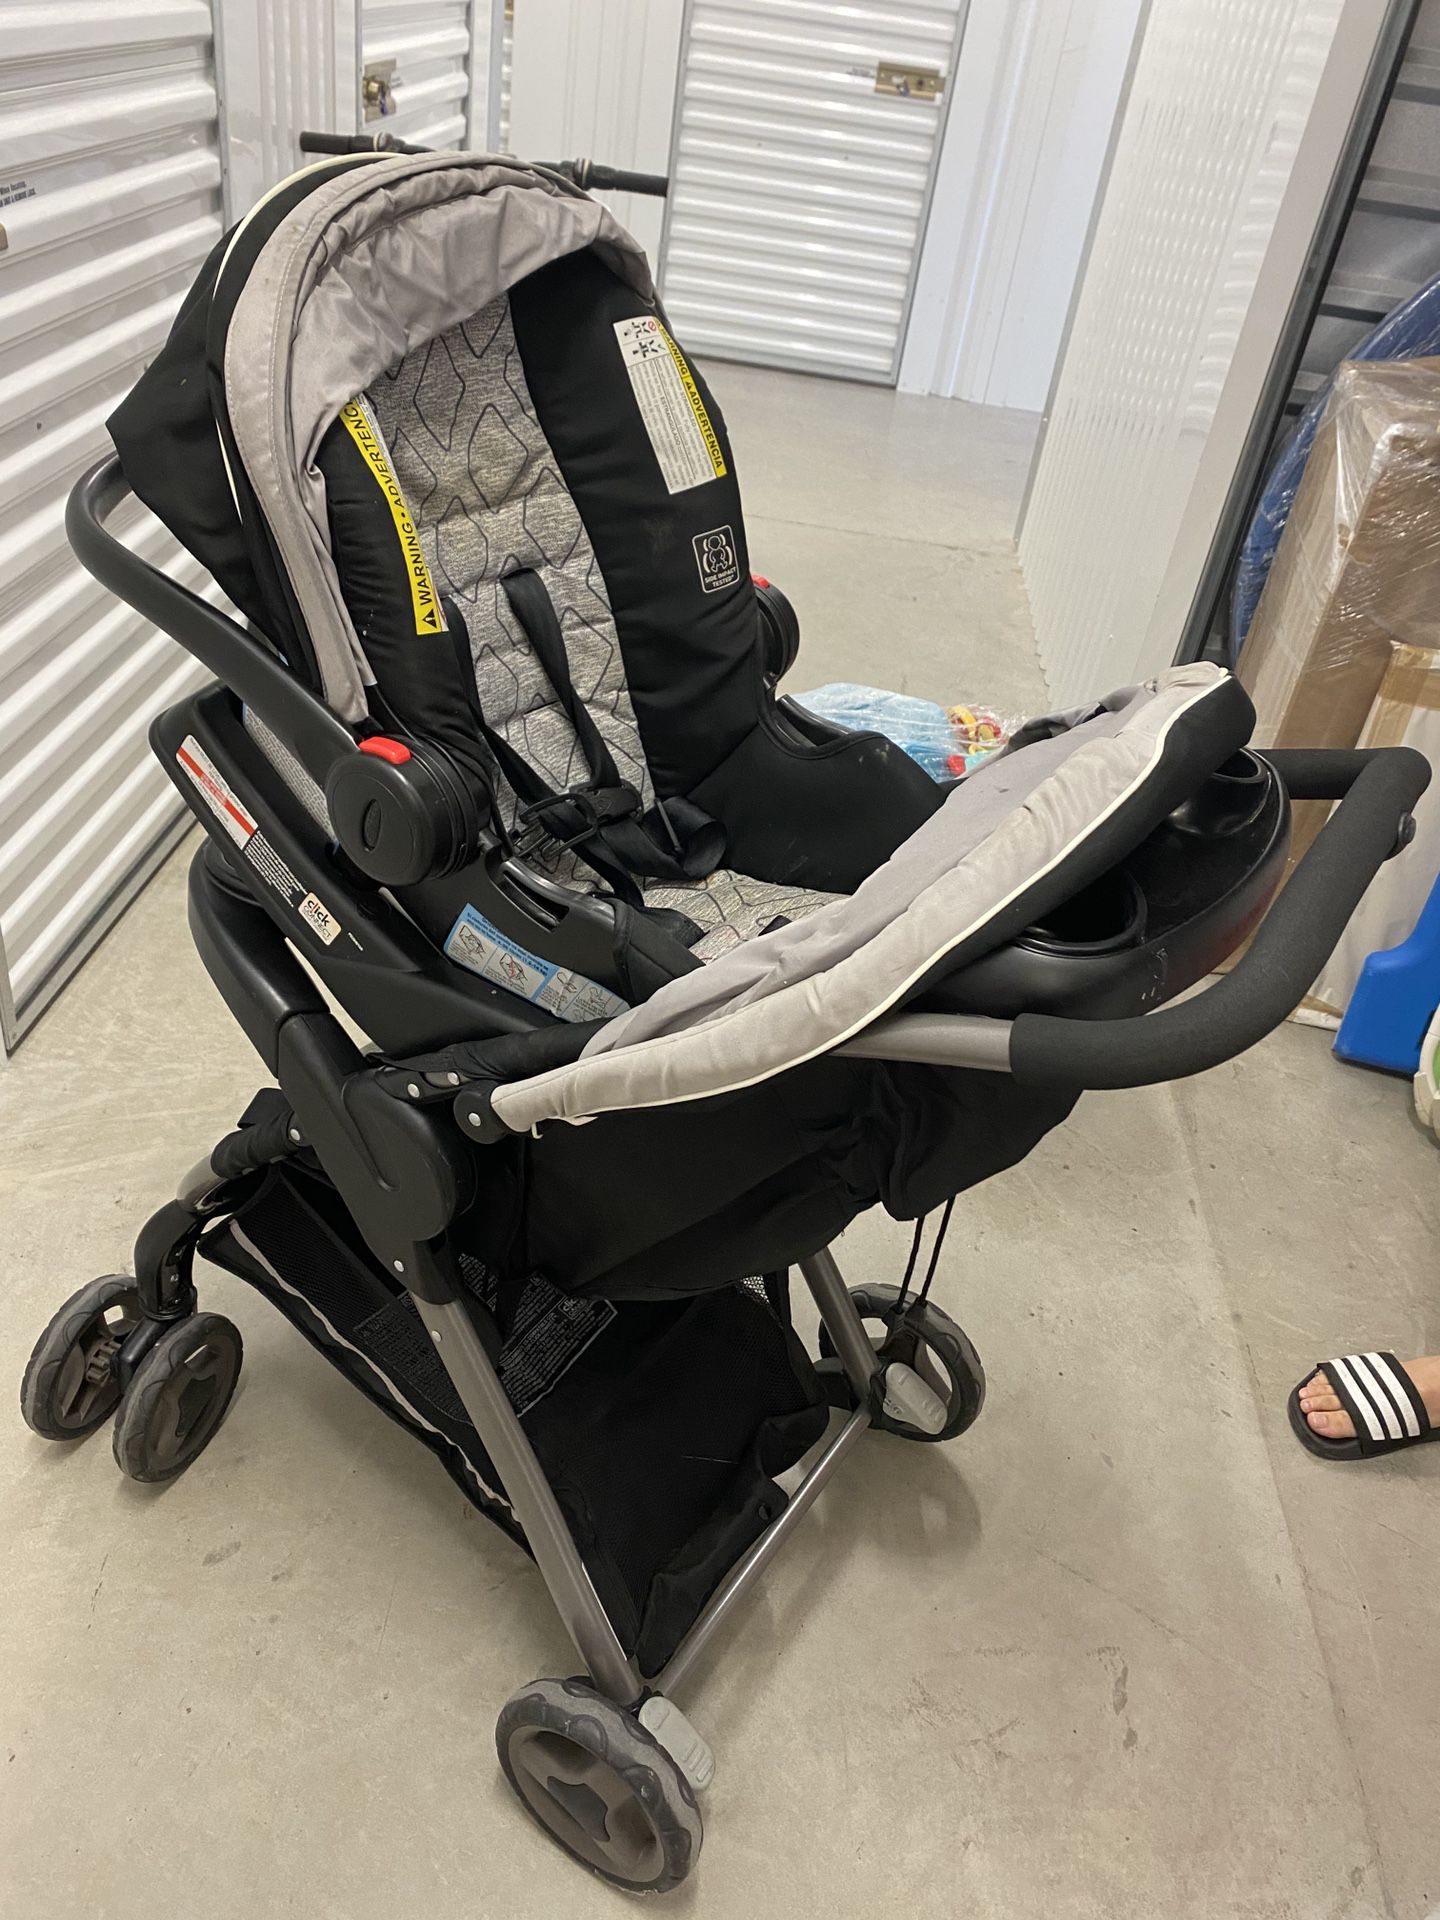 Car seat with stroller